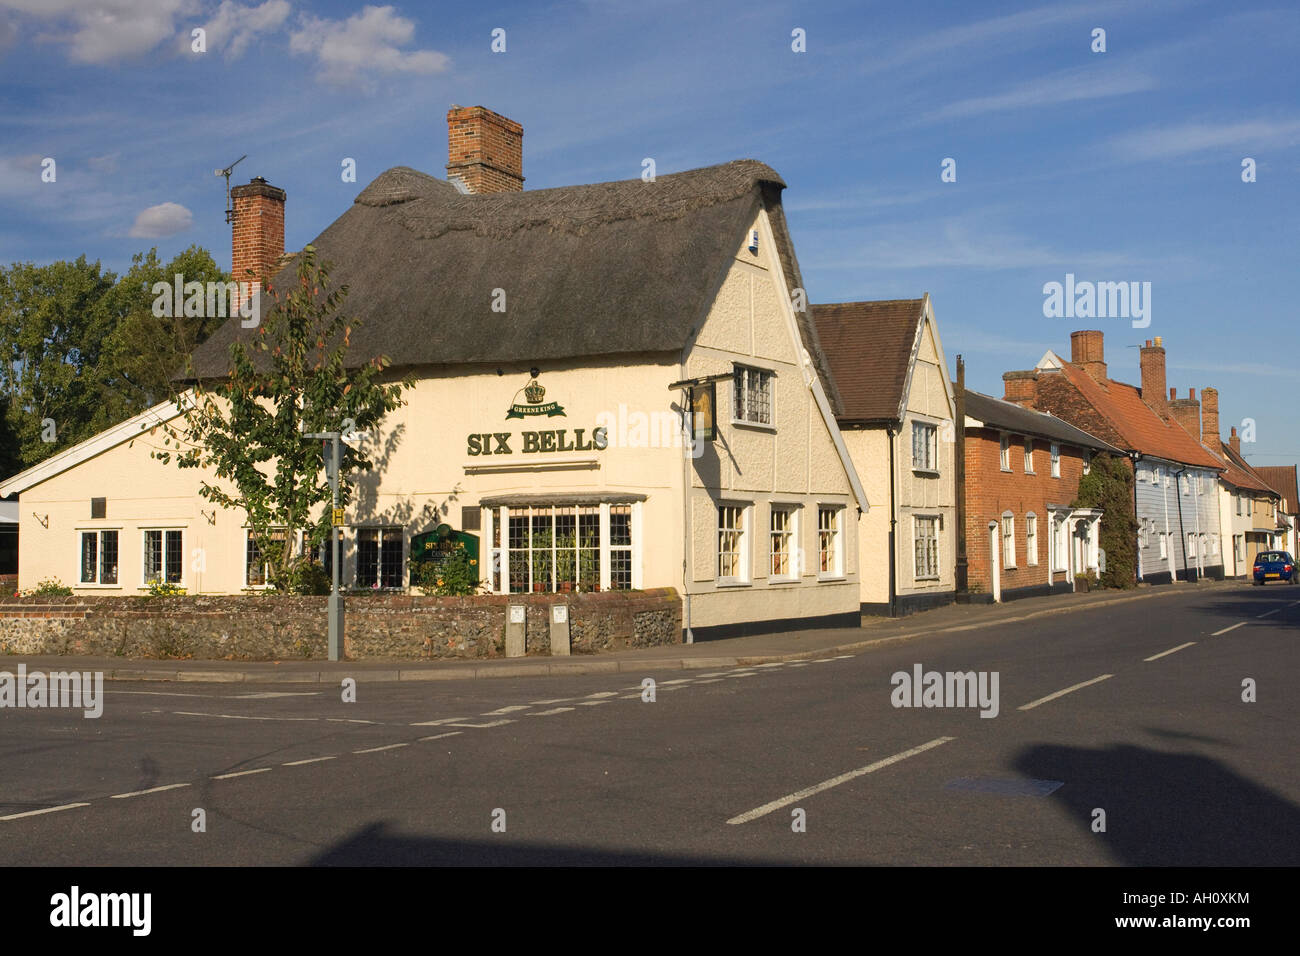 The Six Bells pub in Walsham Le Willows in Suffolk, UK Stock Photo